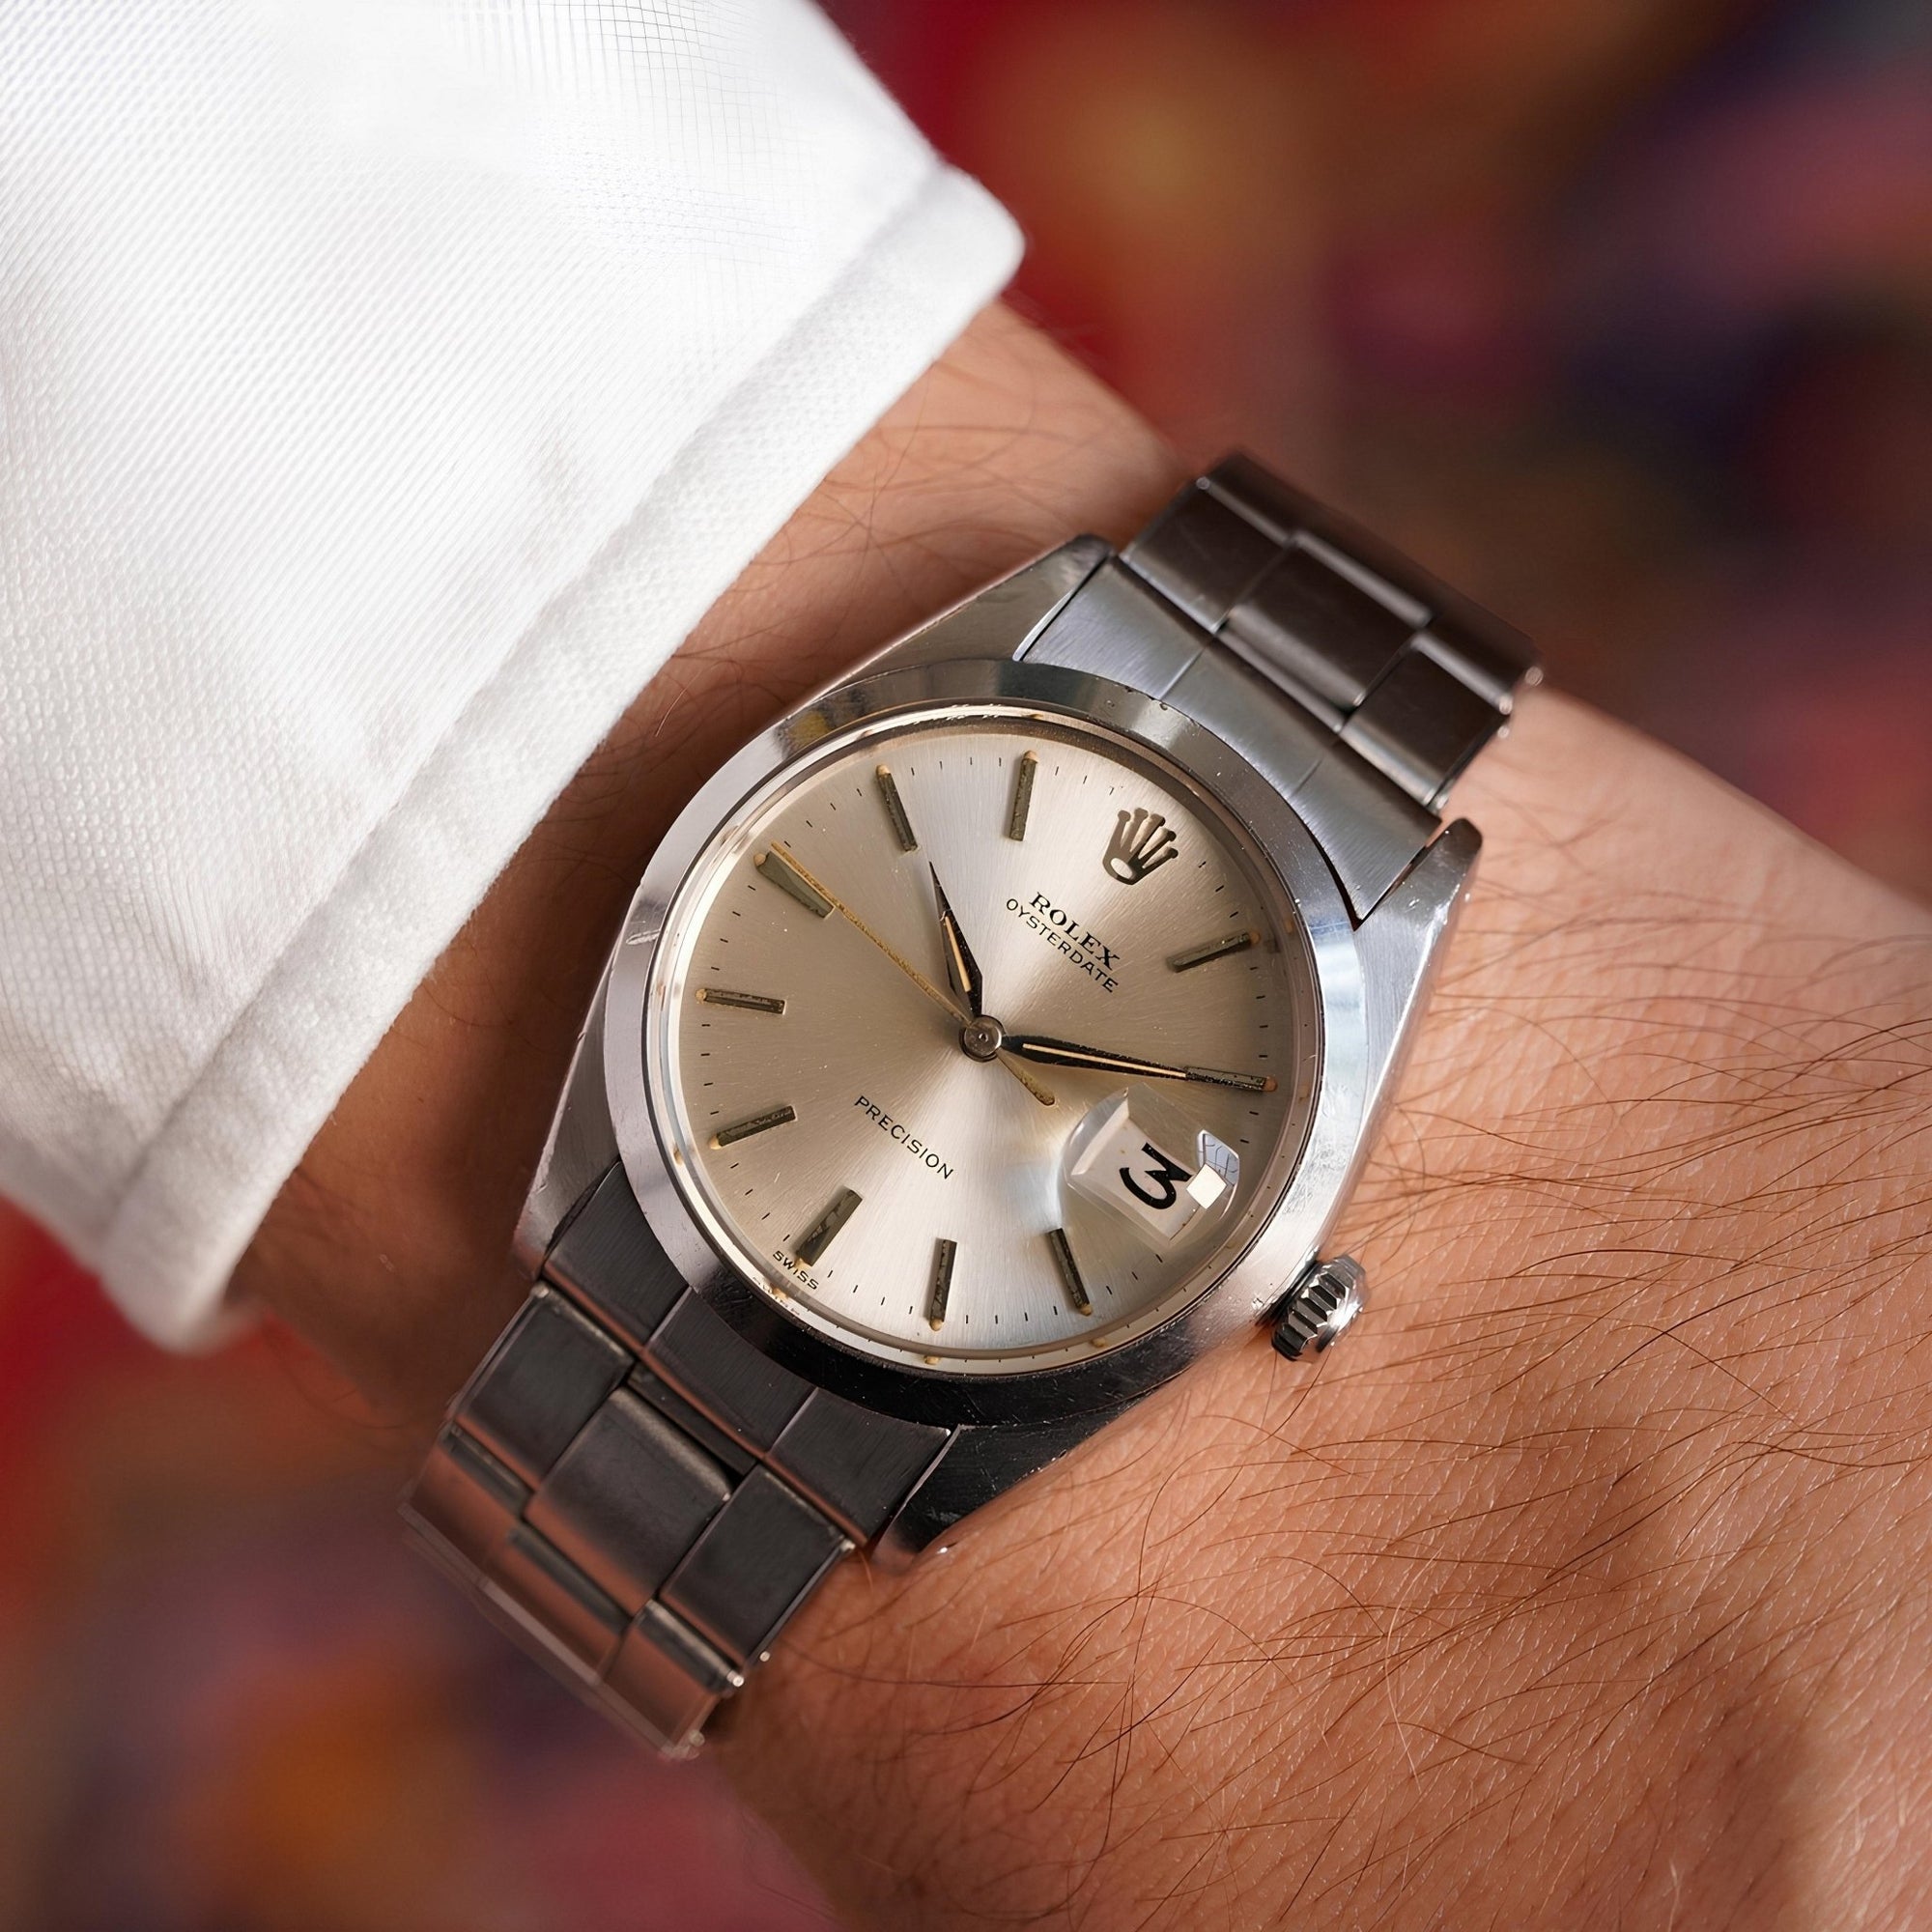 10 Cheapest Rolex Watches: Best Entry-Level for First Time Rolex Buyer